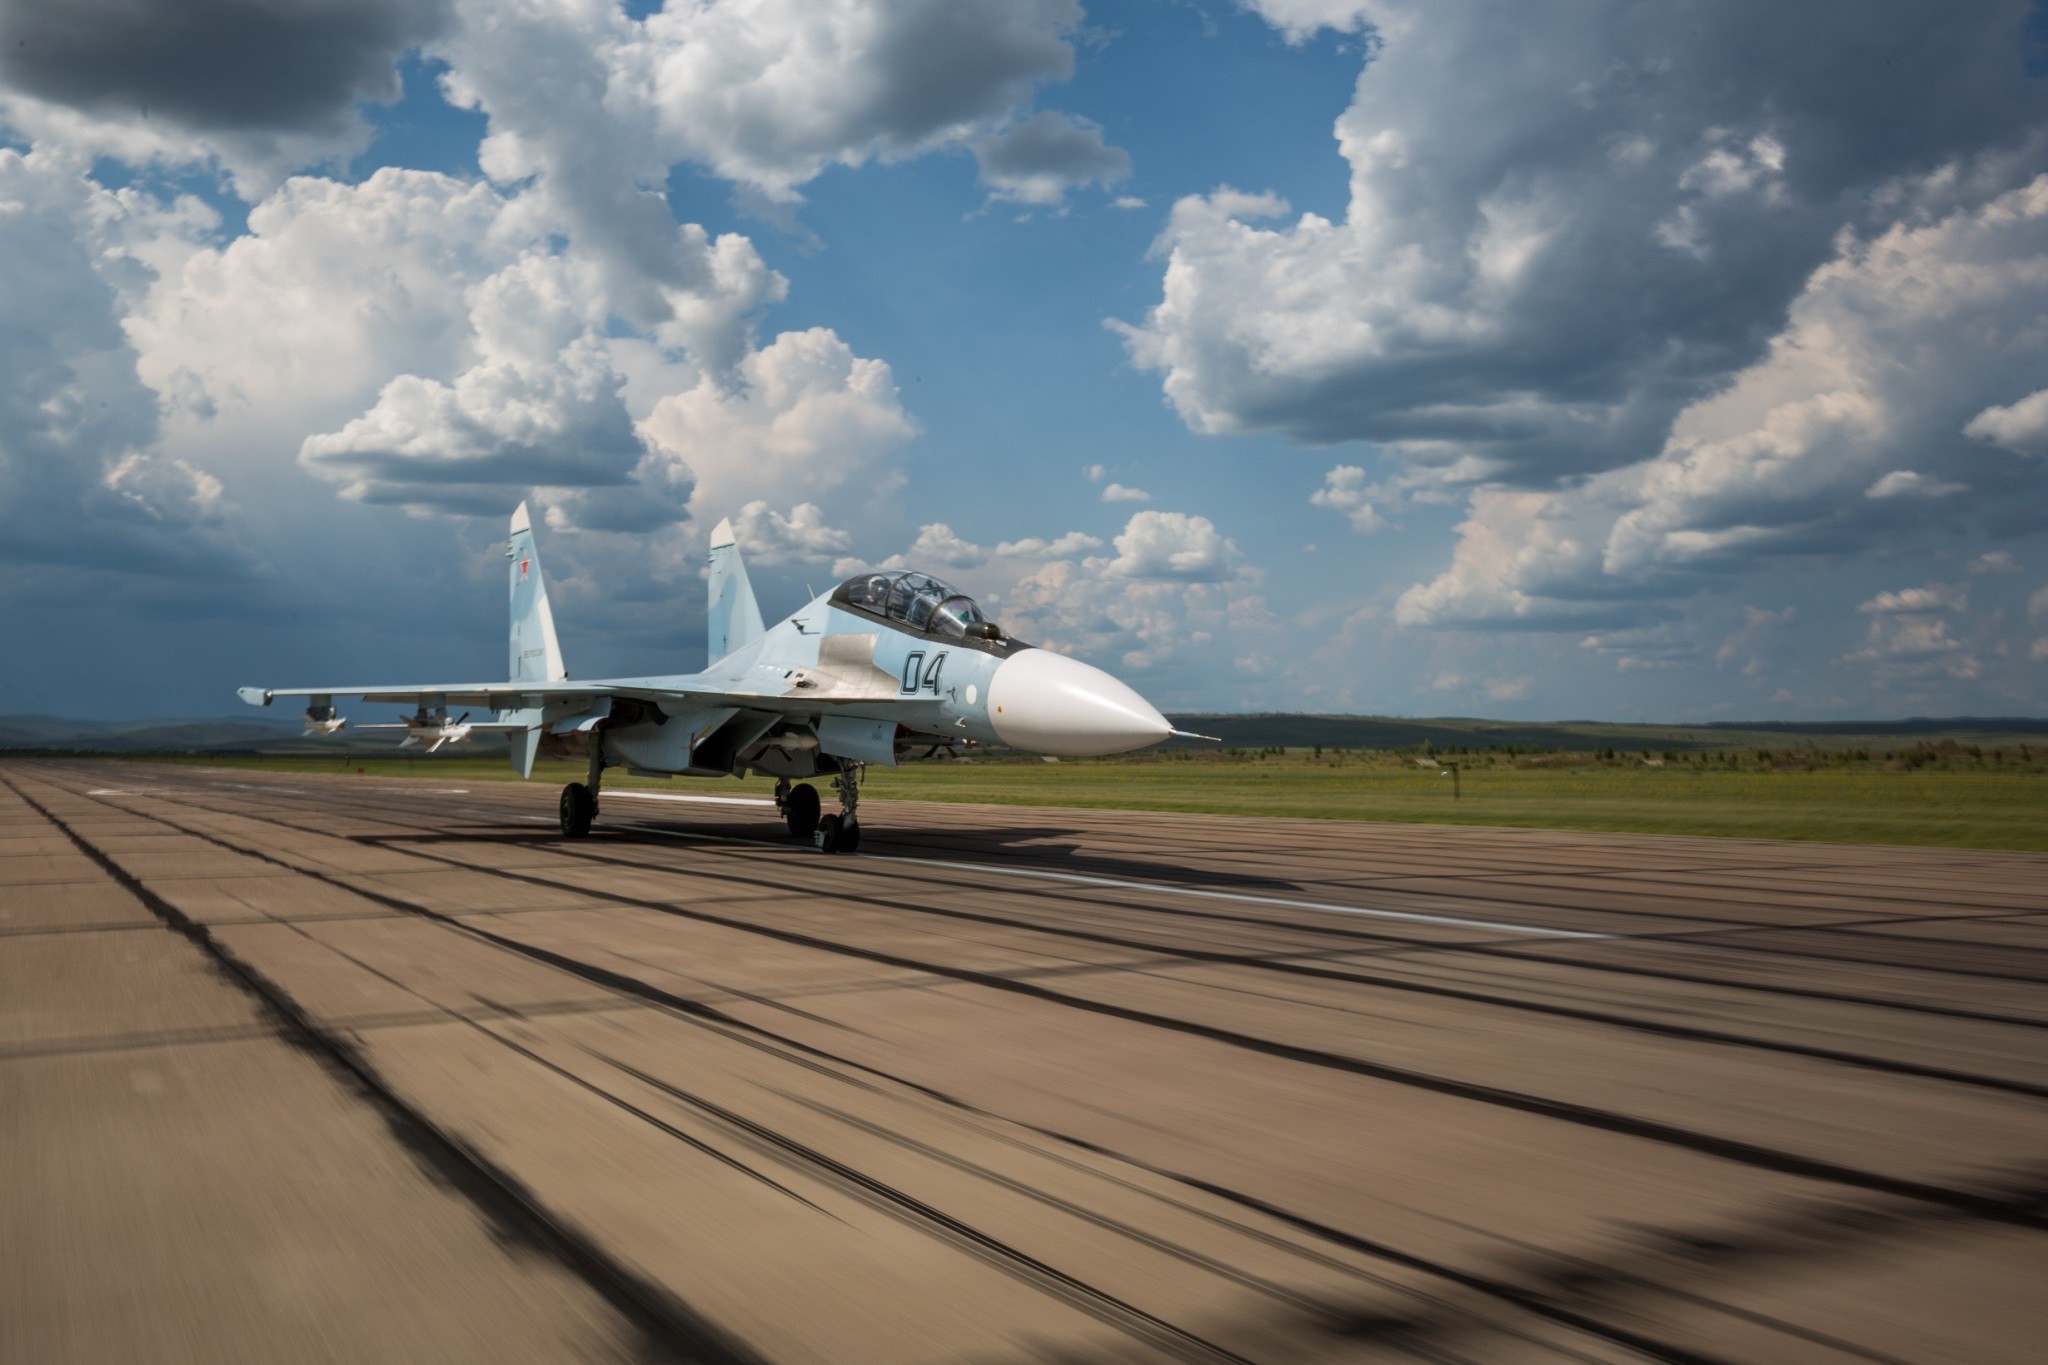 General 2048x1365 military military aircraft vehicle aircraft military vehicle sky clouds Sukhoi Su-30 jet fighter motion blur Russian Air Force Sukhoi runway